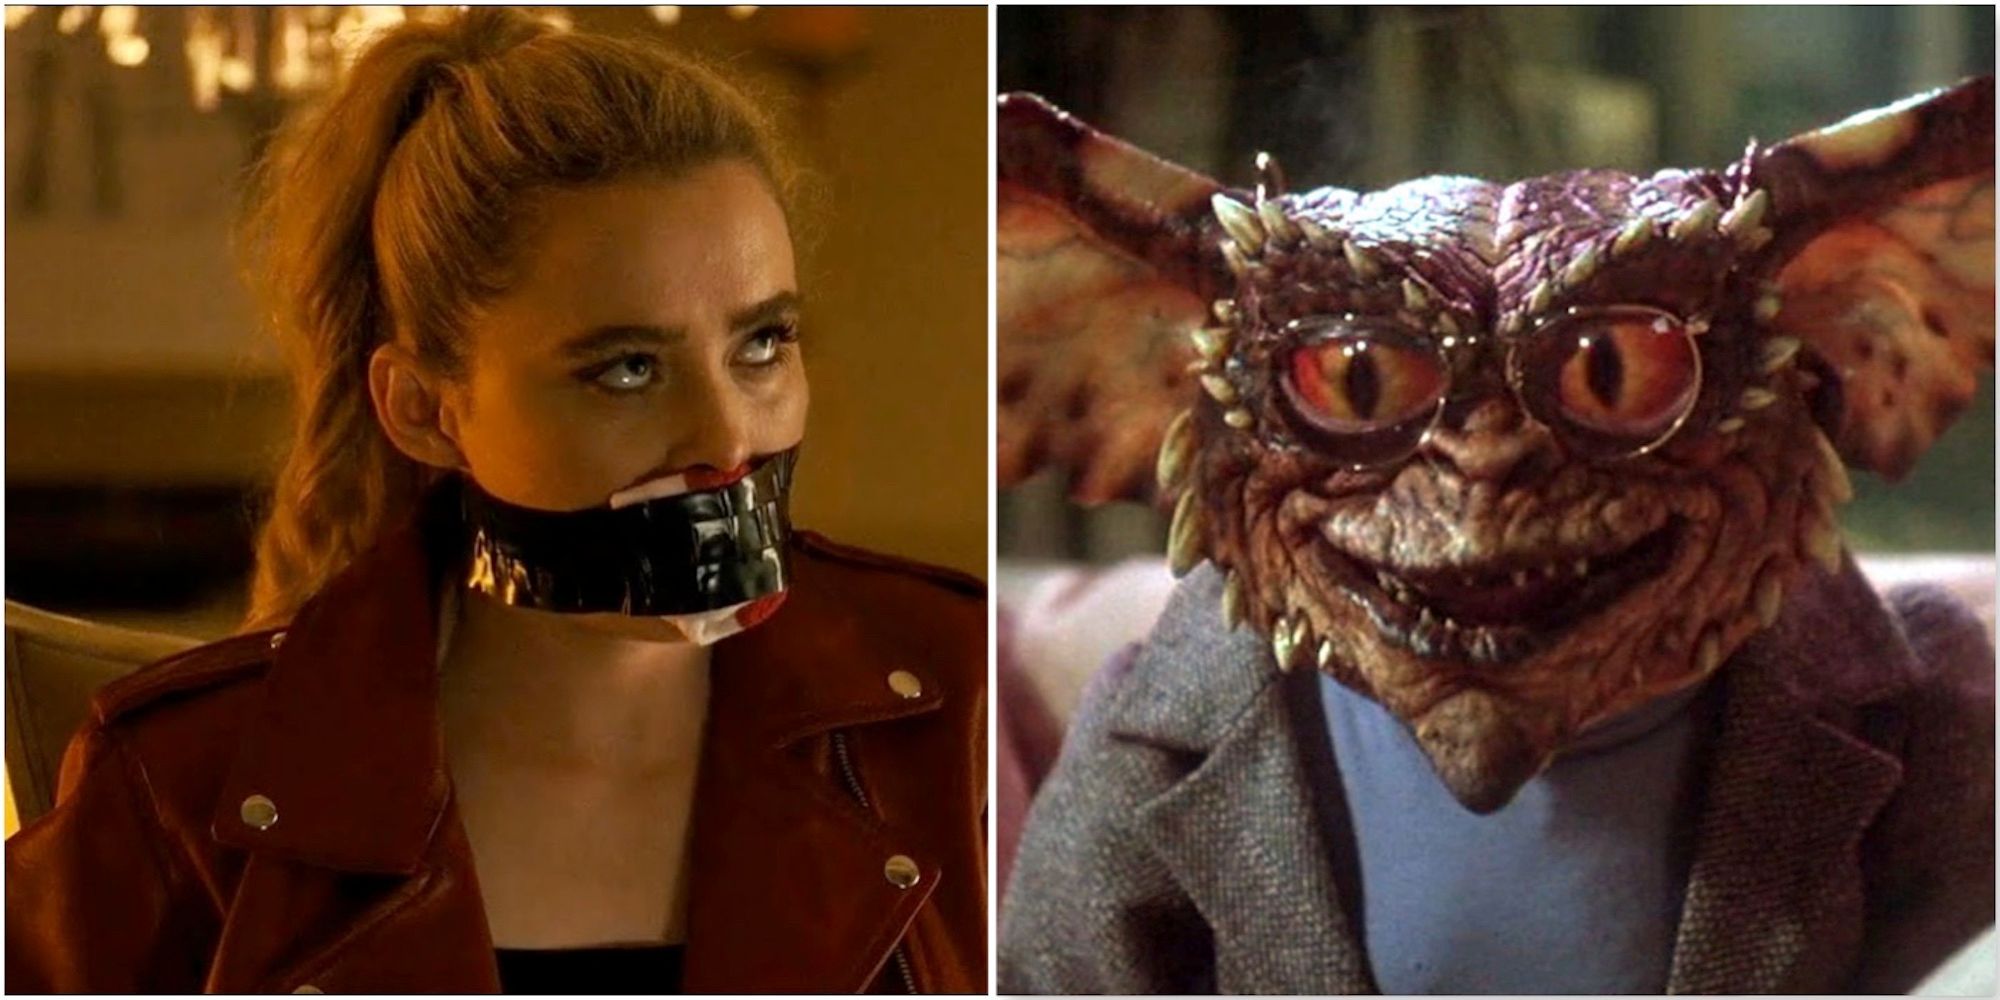 Millie from Freaky and Brainy Gremlin from Gremlins 2